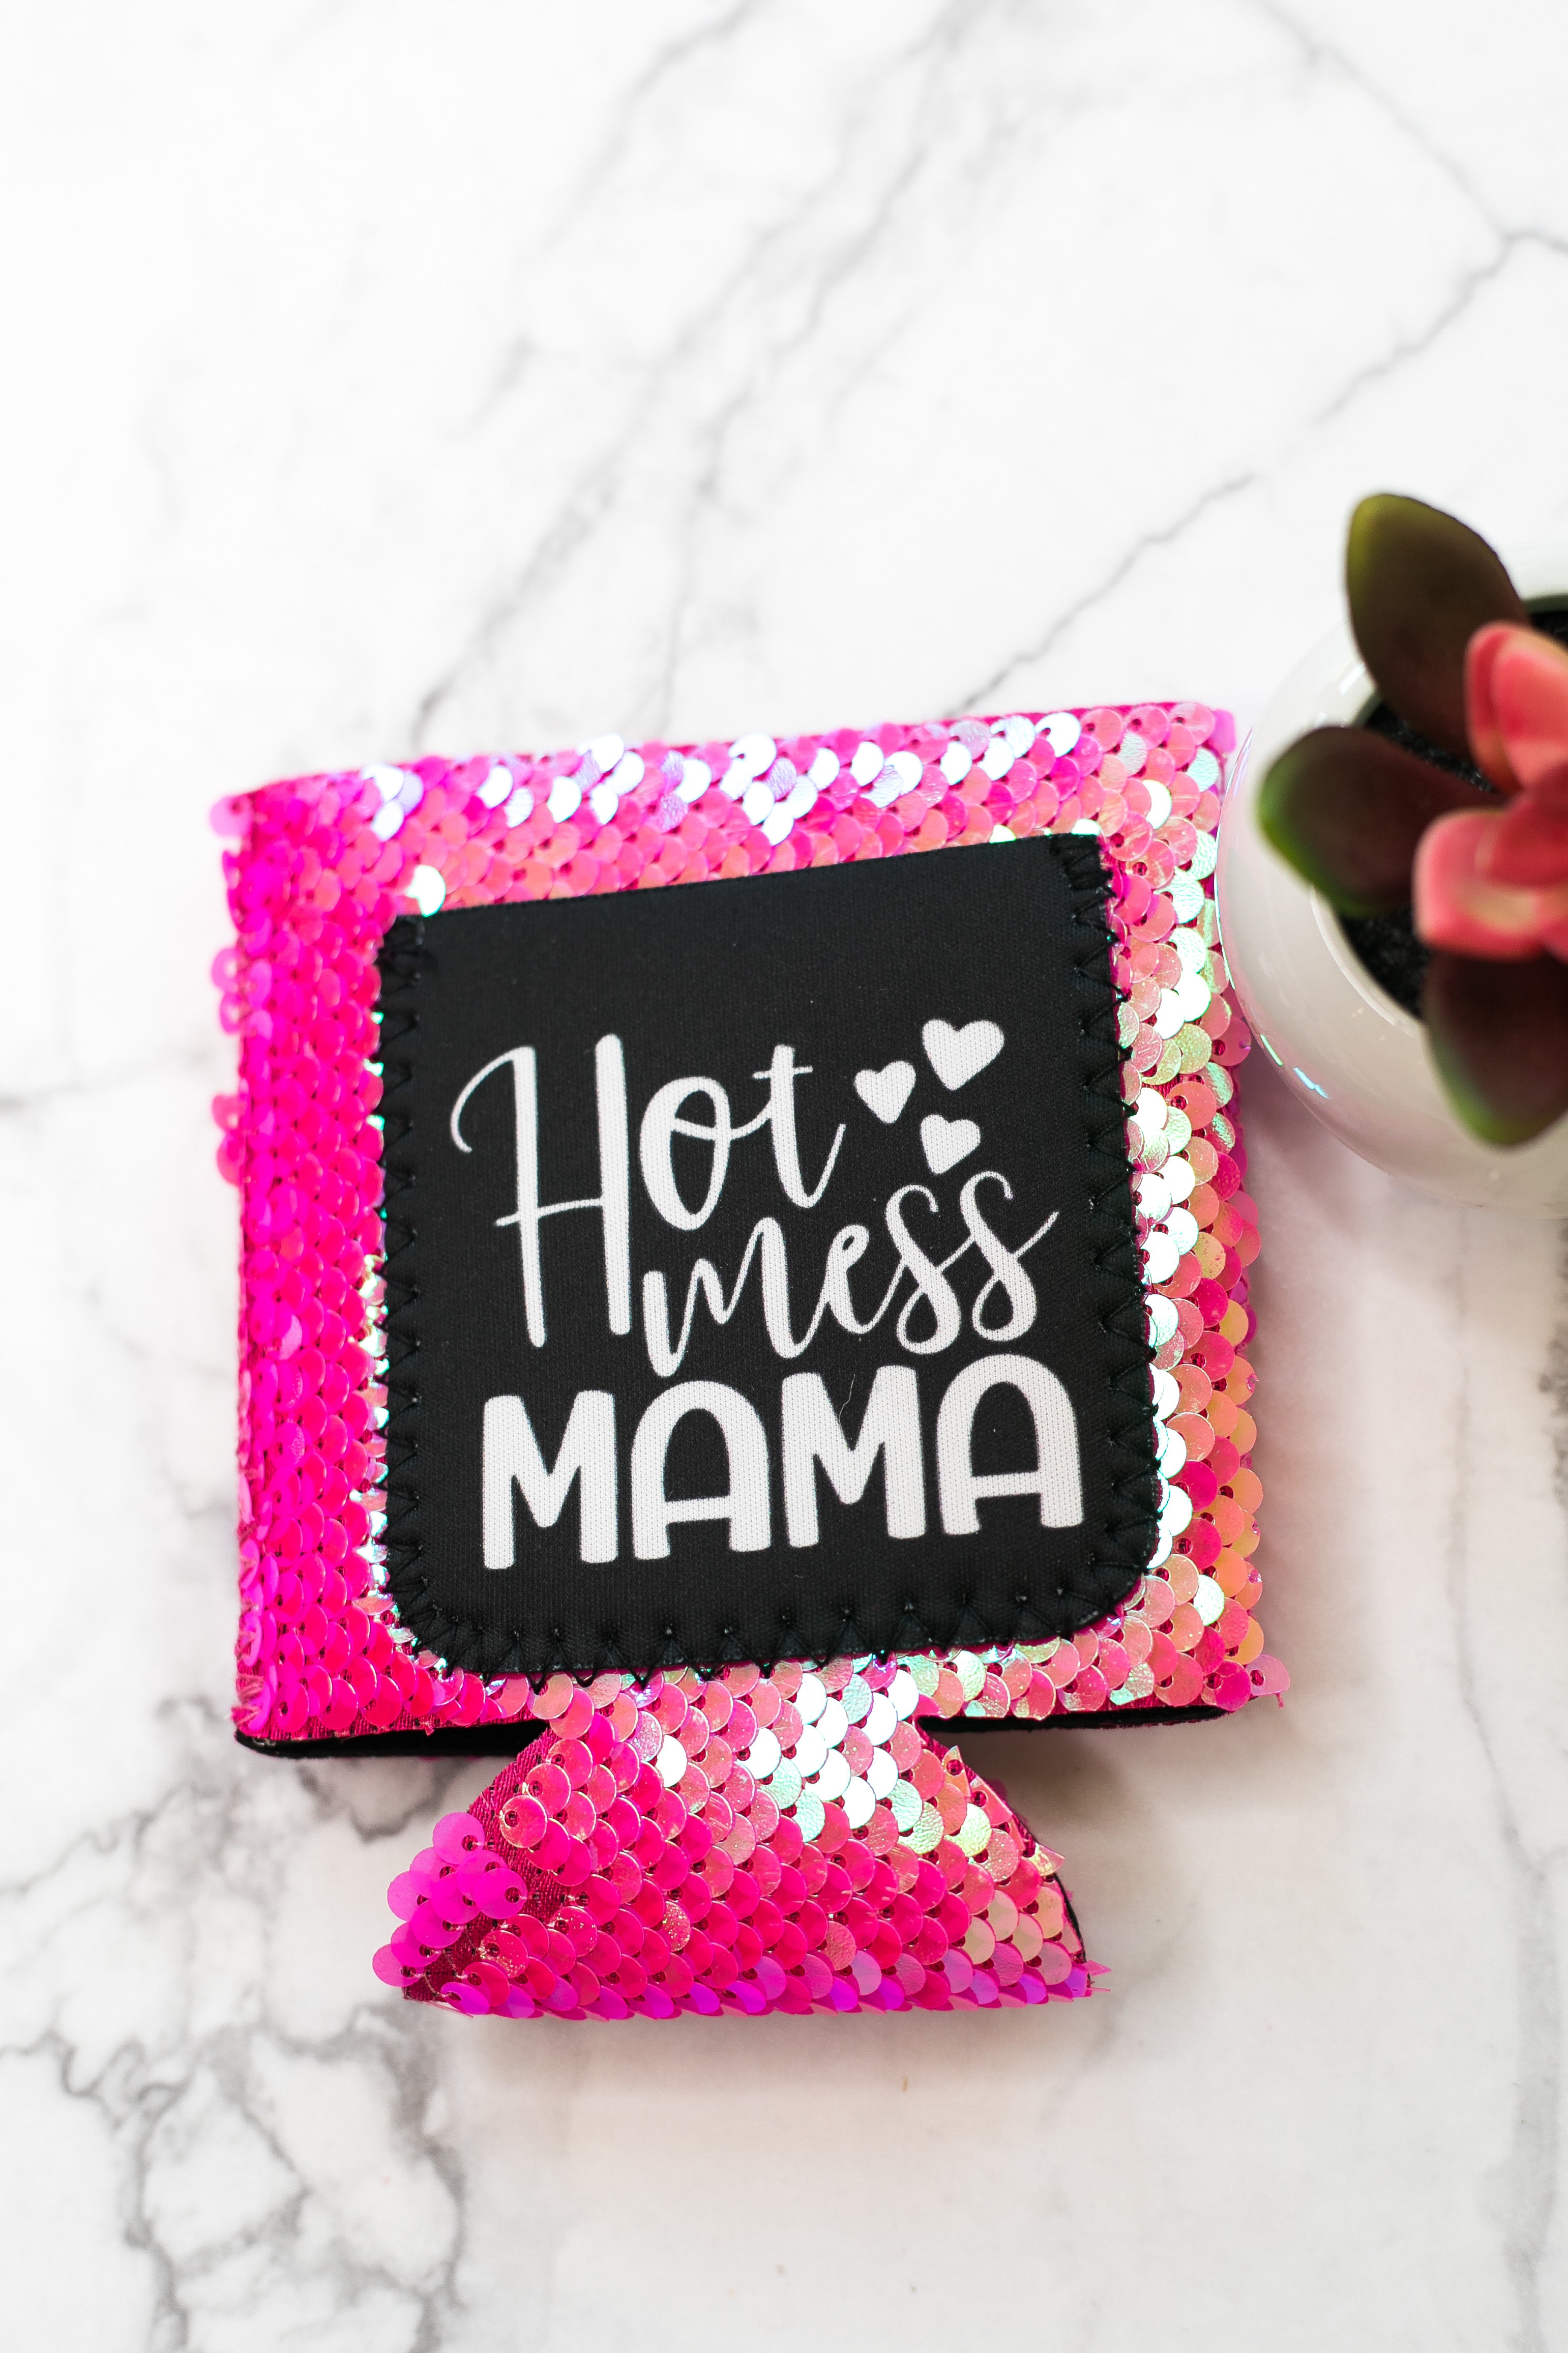 Hot Mess Mama Hot Pink Sequin Pocket Koozie - Giddy Up Glamour Boutique